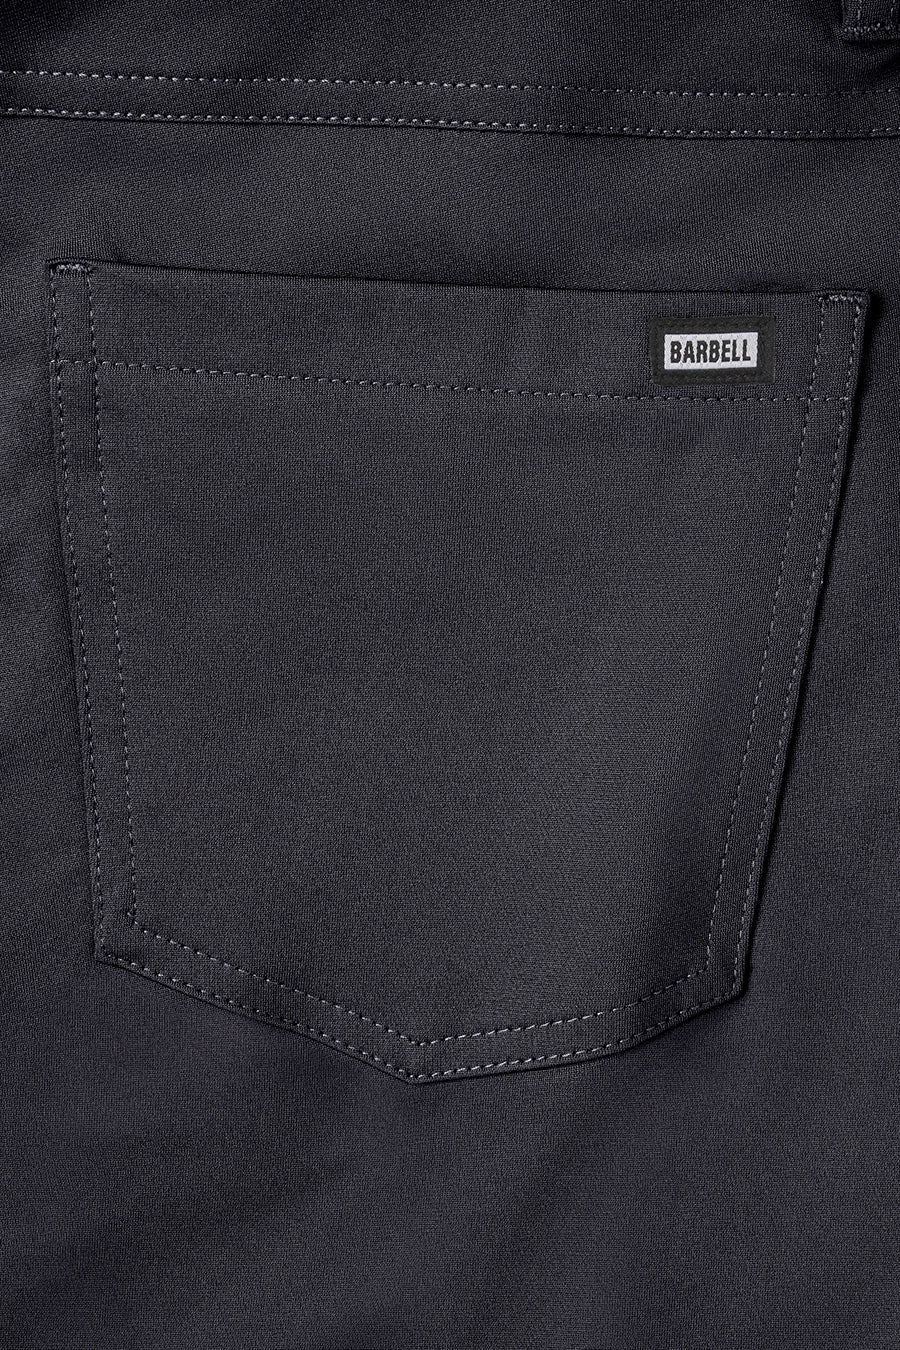 Anything Pant Slim - Navy - photo from back pocket detail #color_navy